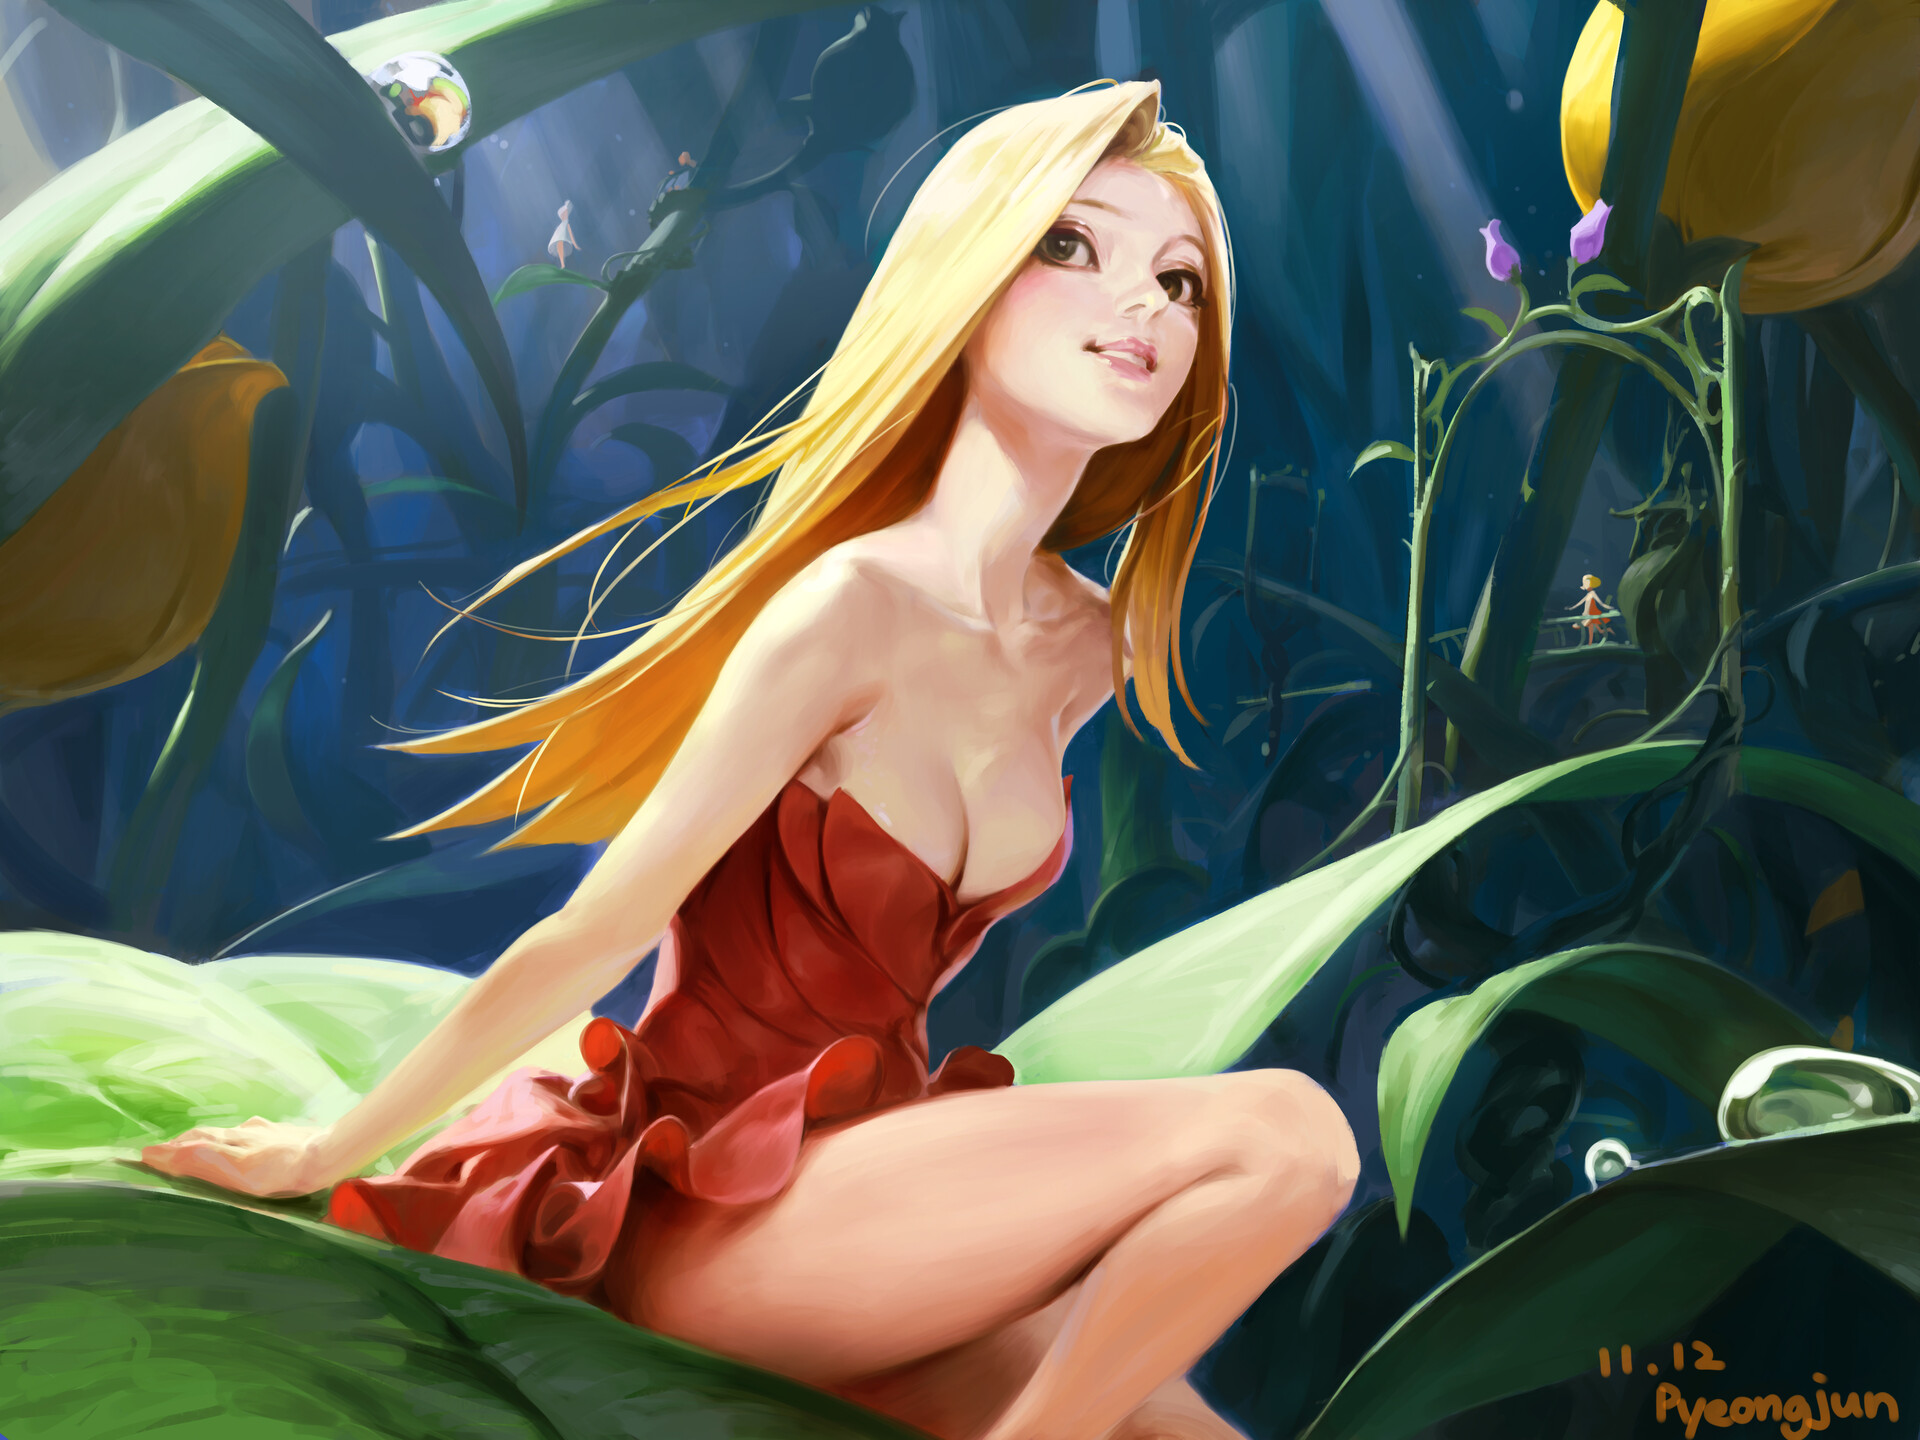 General 1920x1440 Park Pyeongjun fantasy art fantasy girl blonde artwork dress red dress long hair plants leaves red clothing thighs looking into the distance sitting